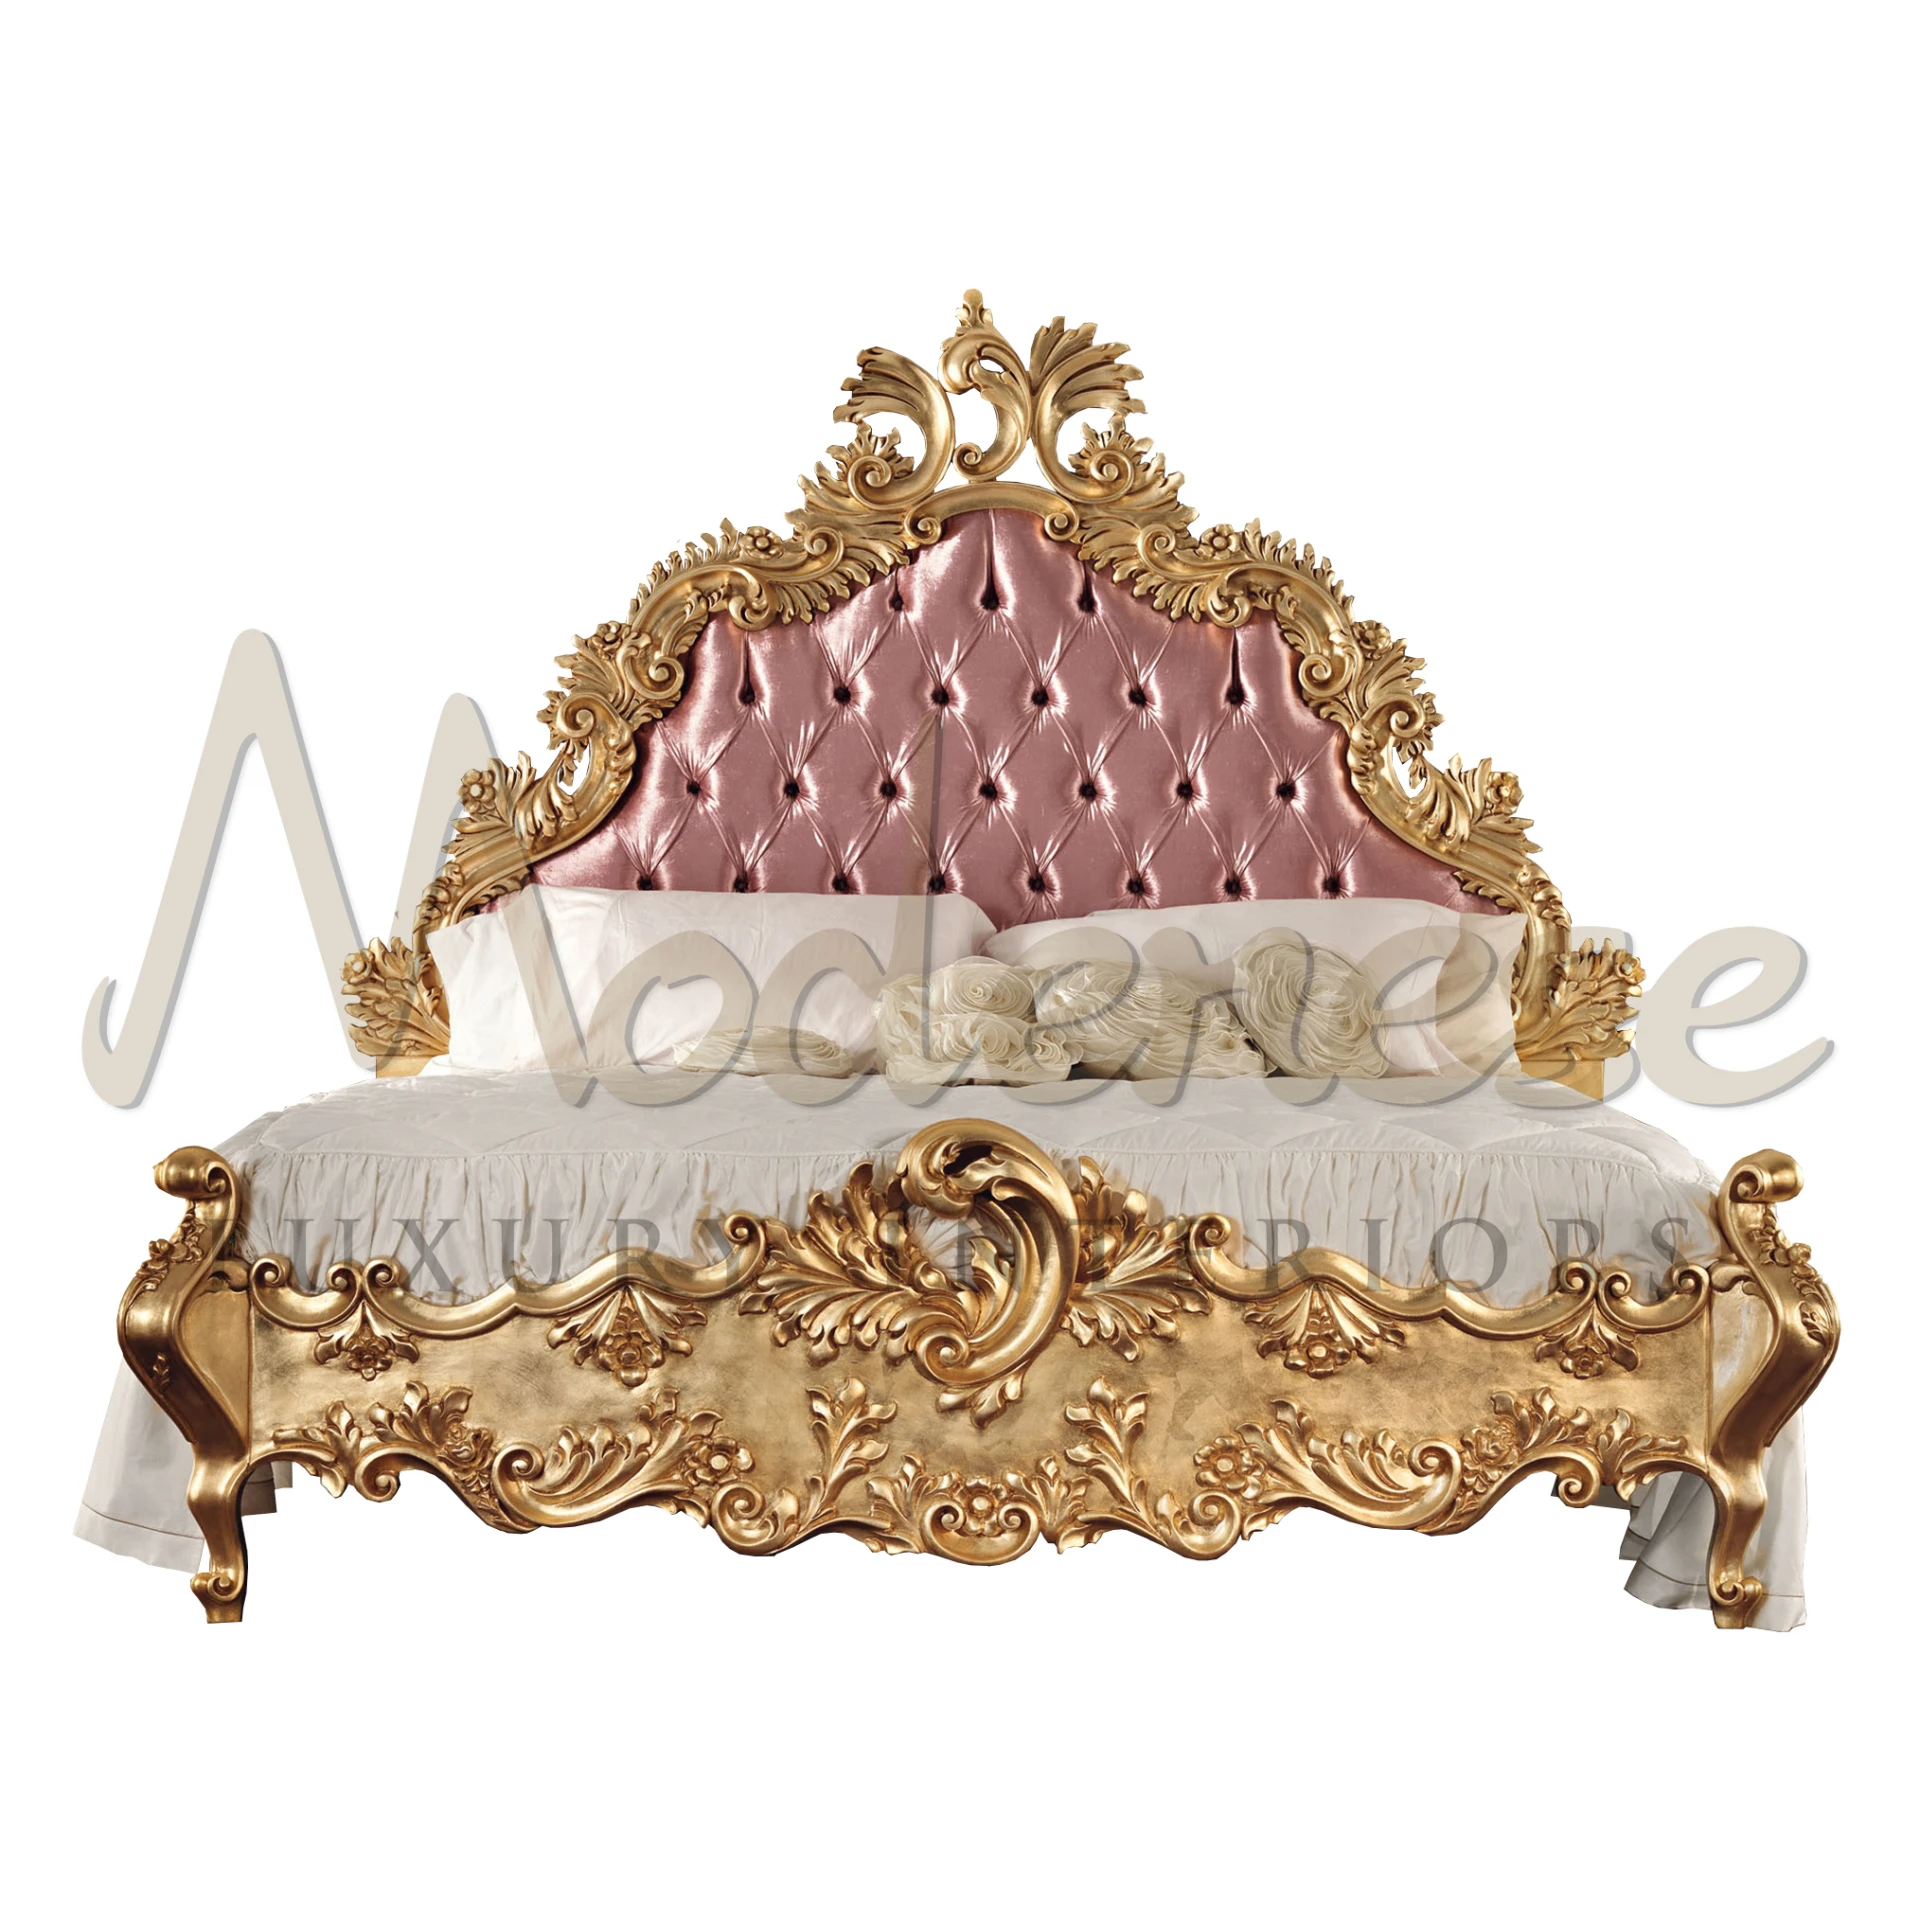 A luxurious classic bed by Modenese Furniture Manufacturer with a pink tufted headboard and gold ornate details, exuding an air of royal timeless elegance.